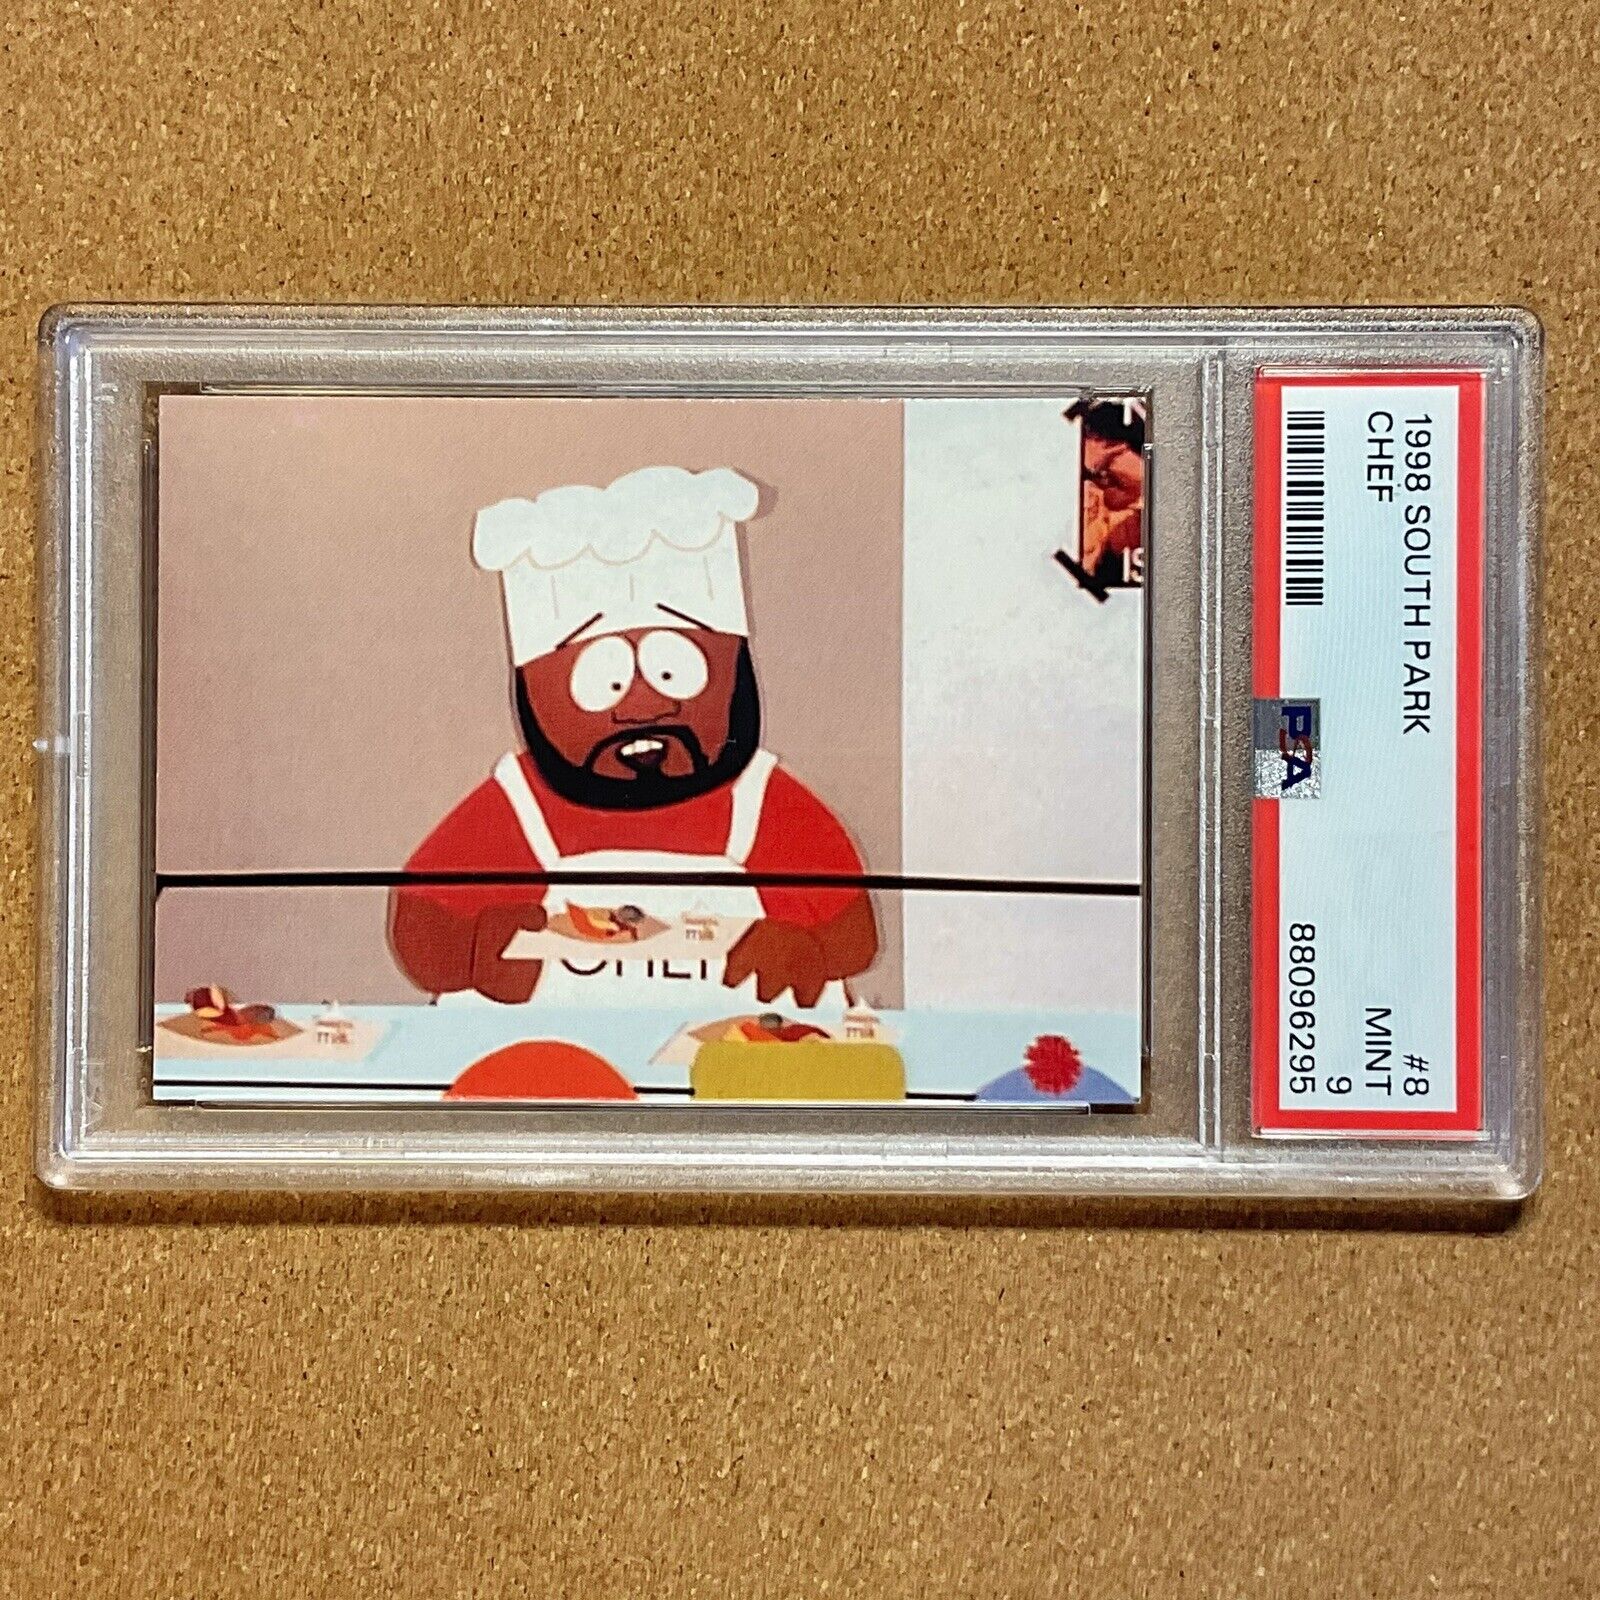 SOUTH PARK #8 CHEF (ISAAC HAYES) 1998 COMIC IMAGES VTG CARD - PSA 9 MINT